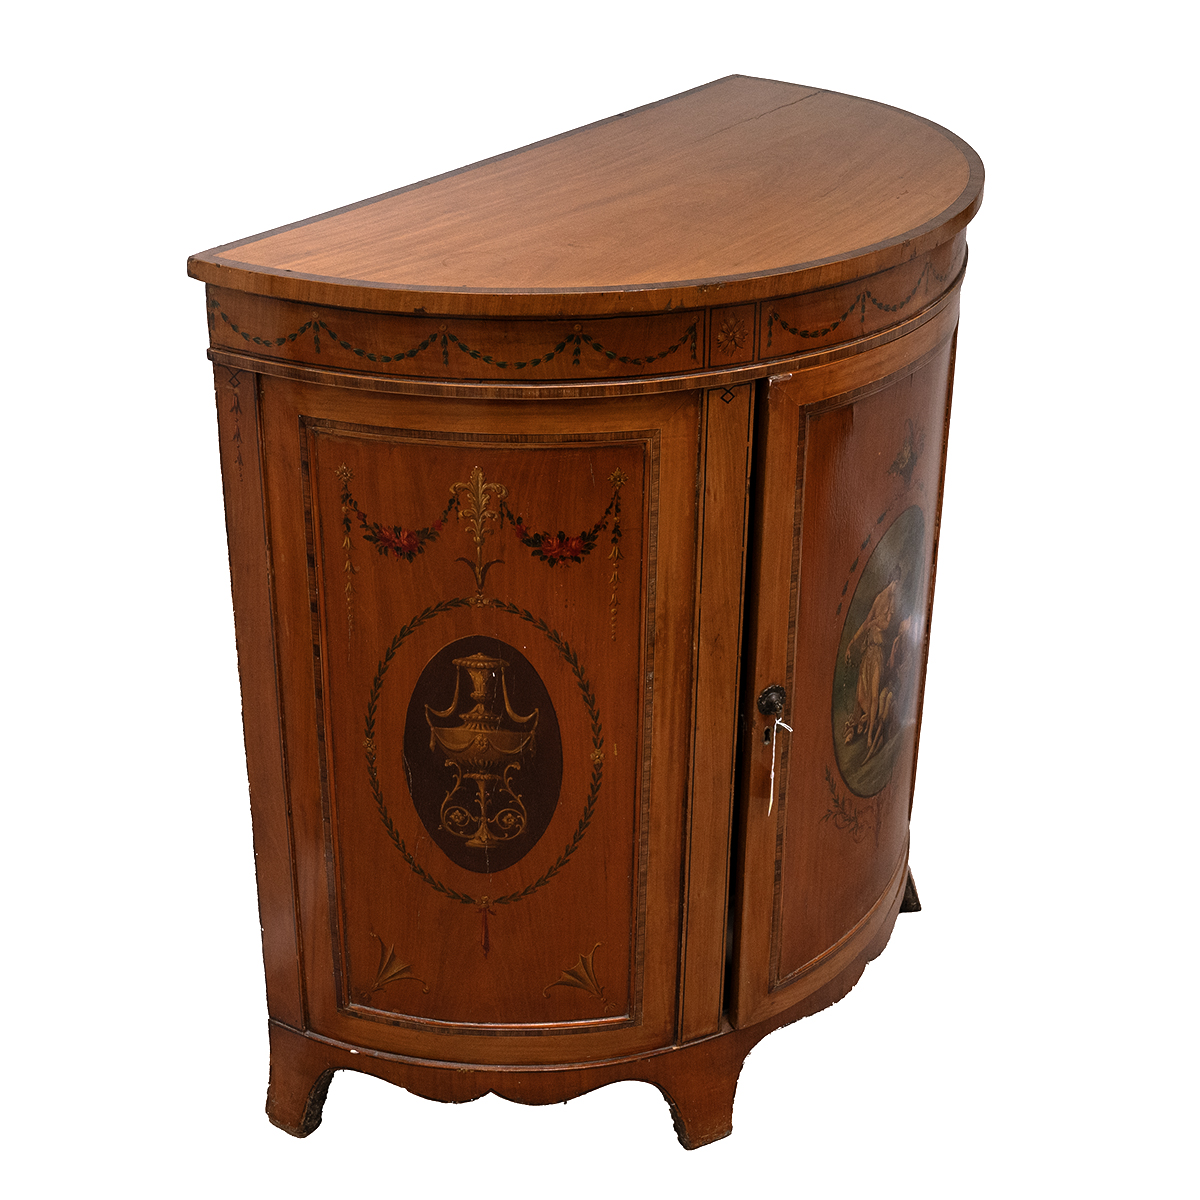 Early 20th Century Sheraton Revival Yew Wood demi lune cabinet with hand painted panels and door ... - Image 3 of 3